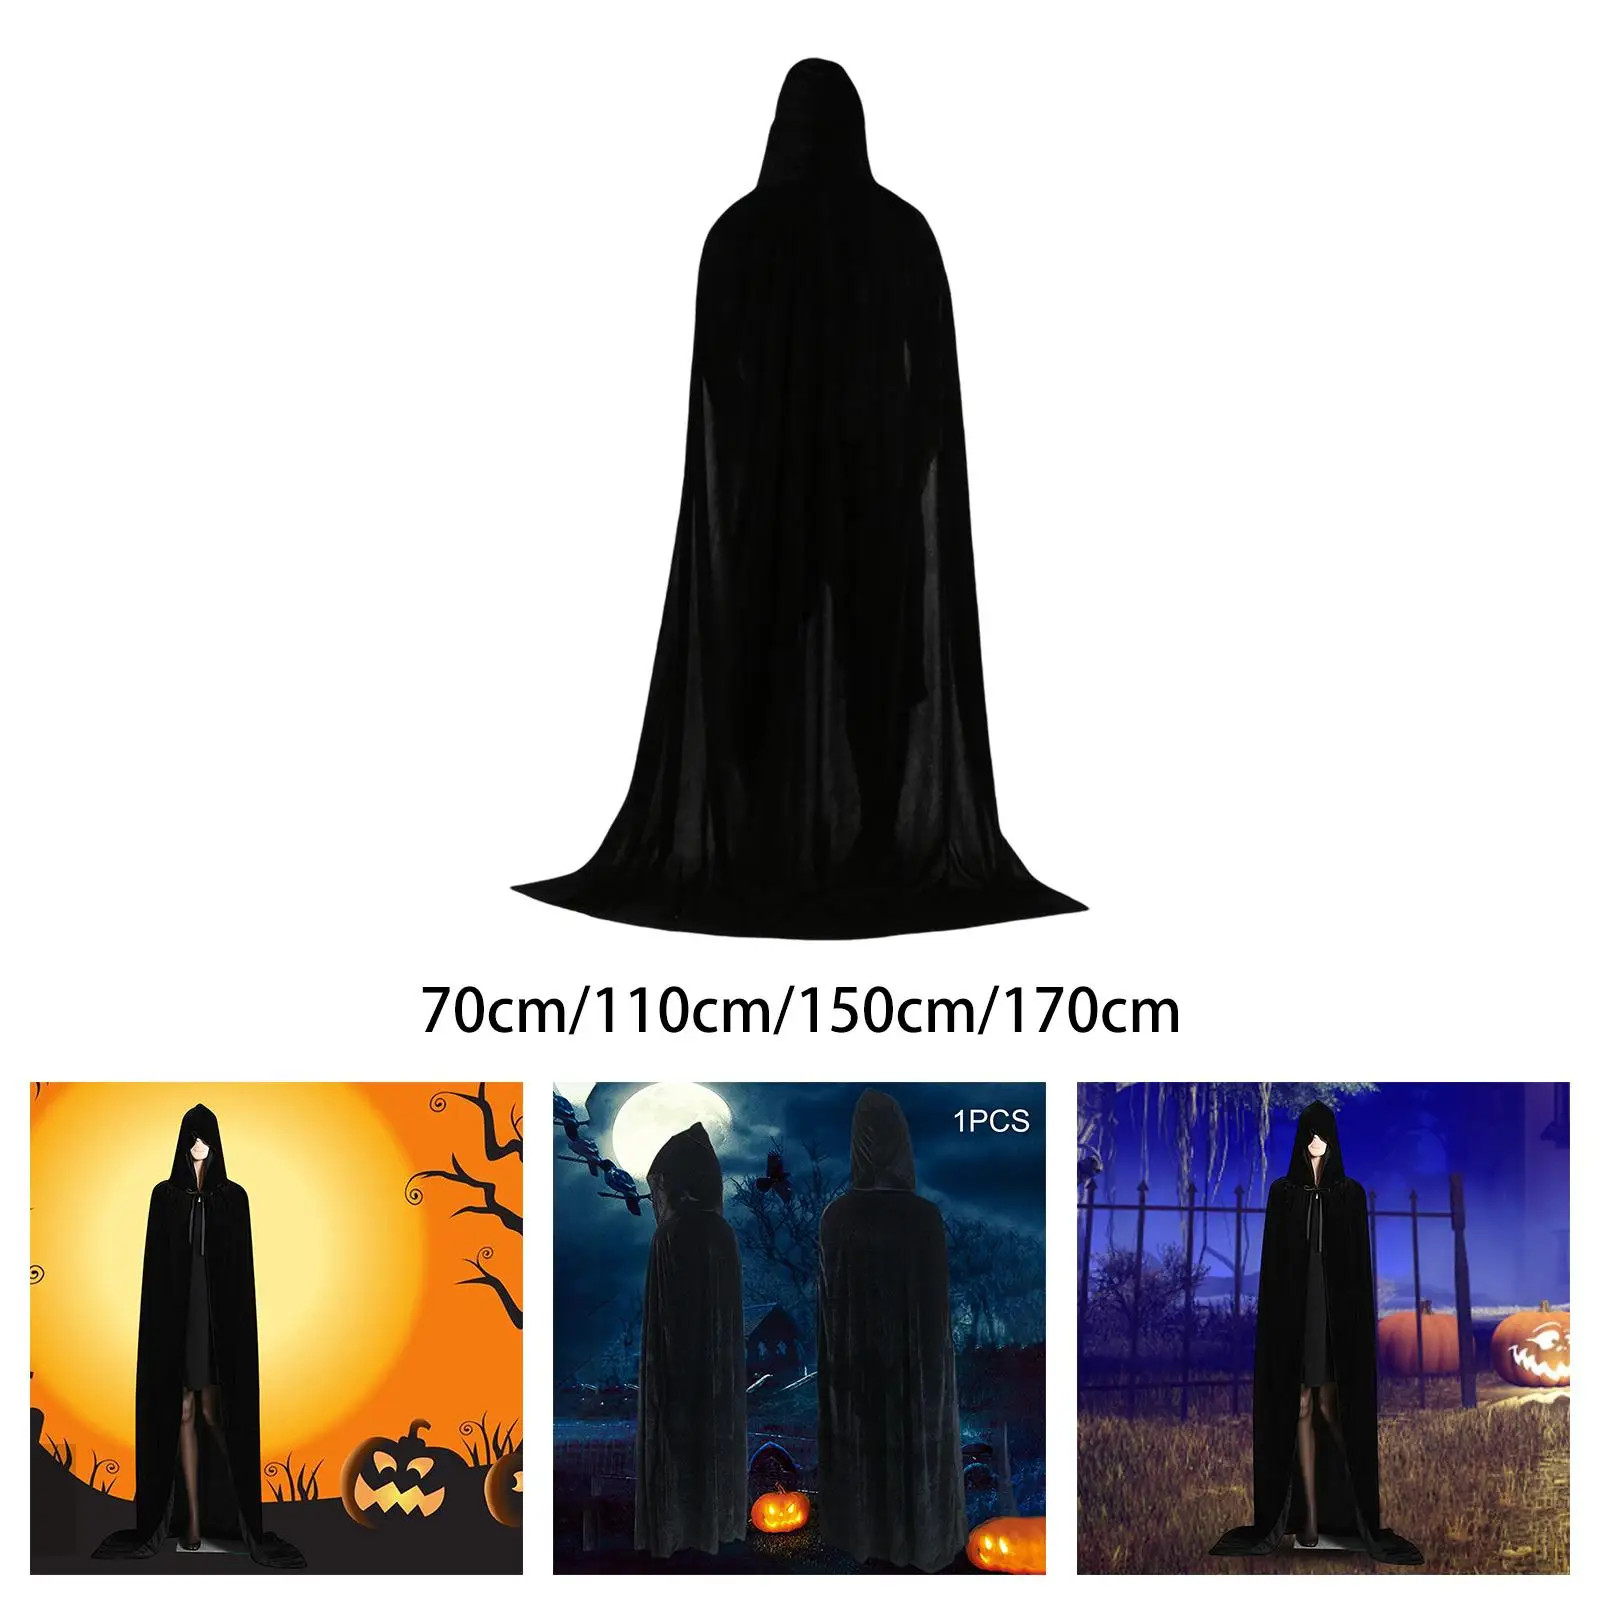 Goth Cloak with Hood Wizard Costume Victorian Fancy Dress Medieval Halloween Cosplay Capes for Adults Party Festival Role Play